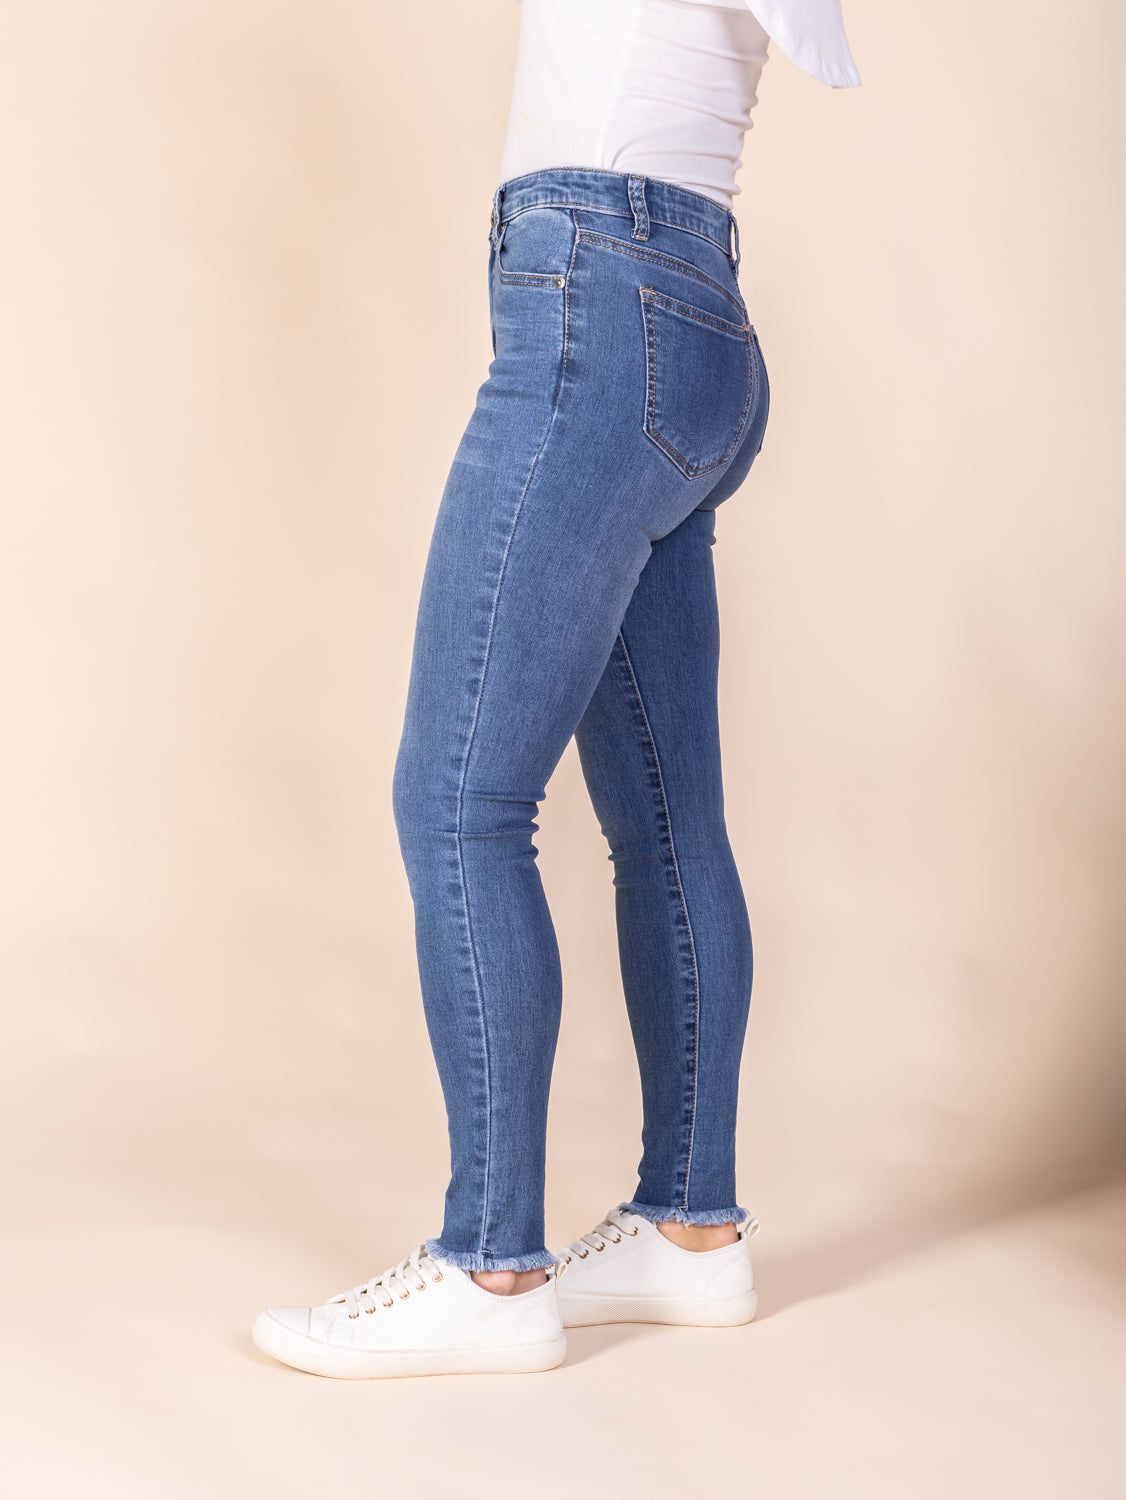 The Frenchie Denim - Blue Mid Rise